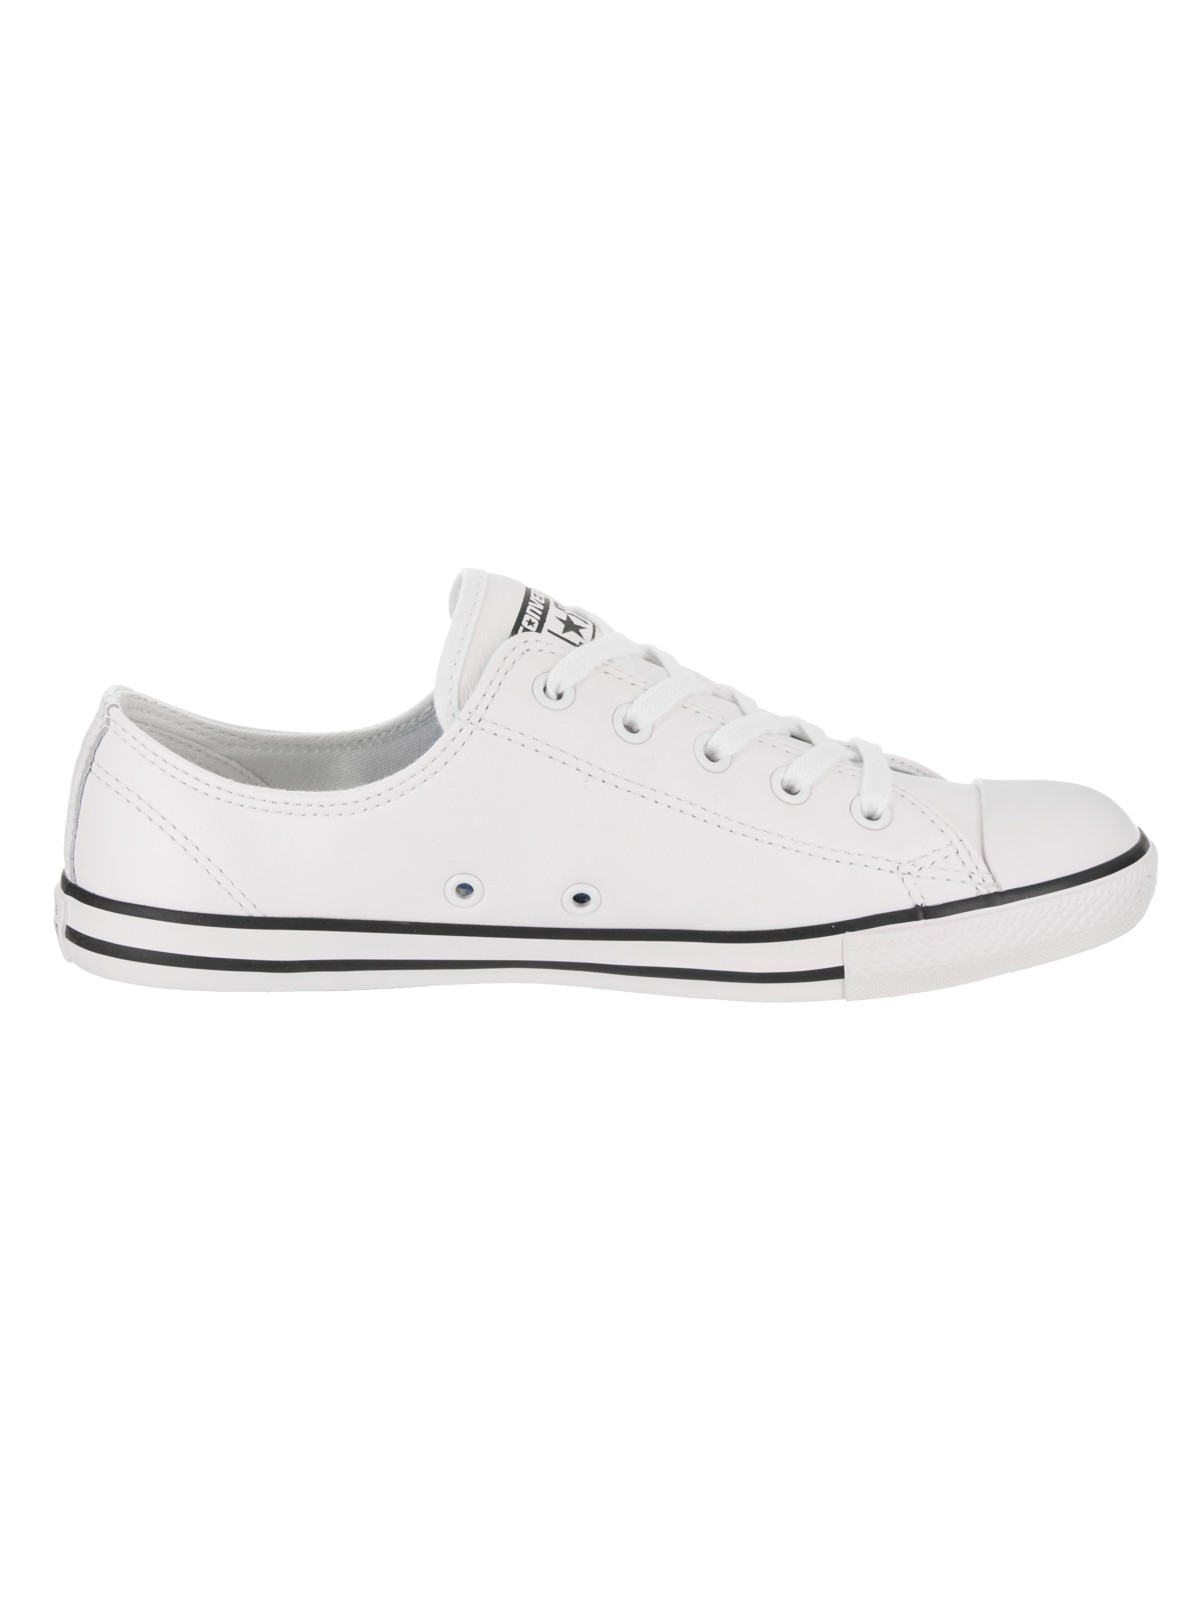 Converse Women's Chuck Taylor All Star Dainty Ox Casual Shoe - image 2 of 5